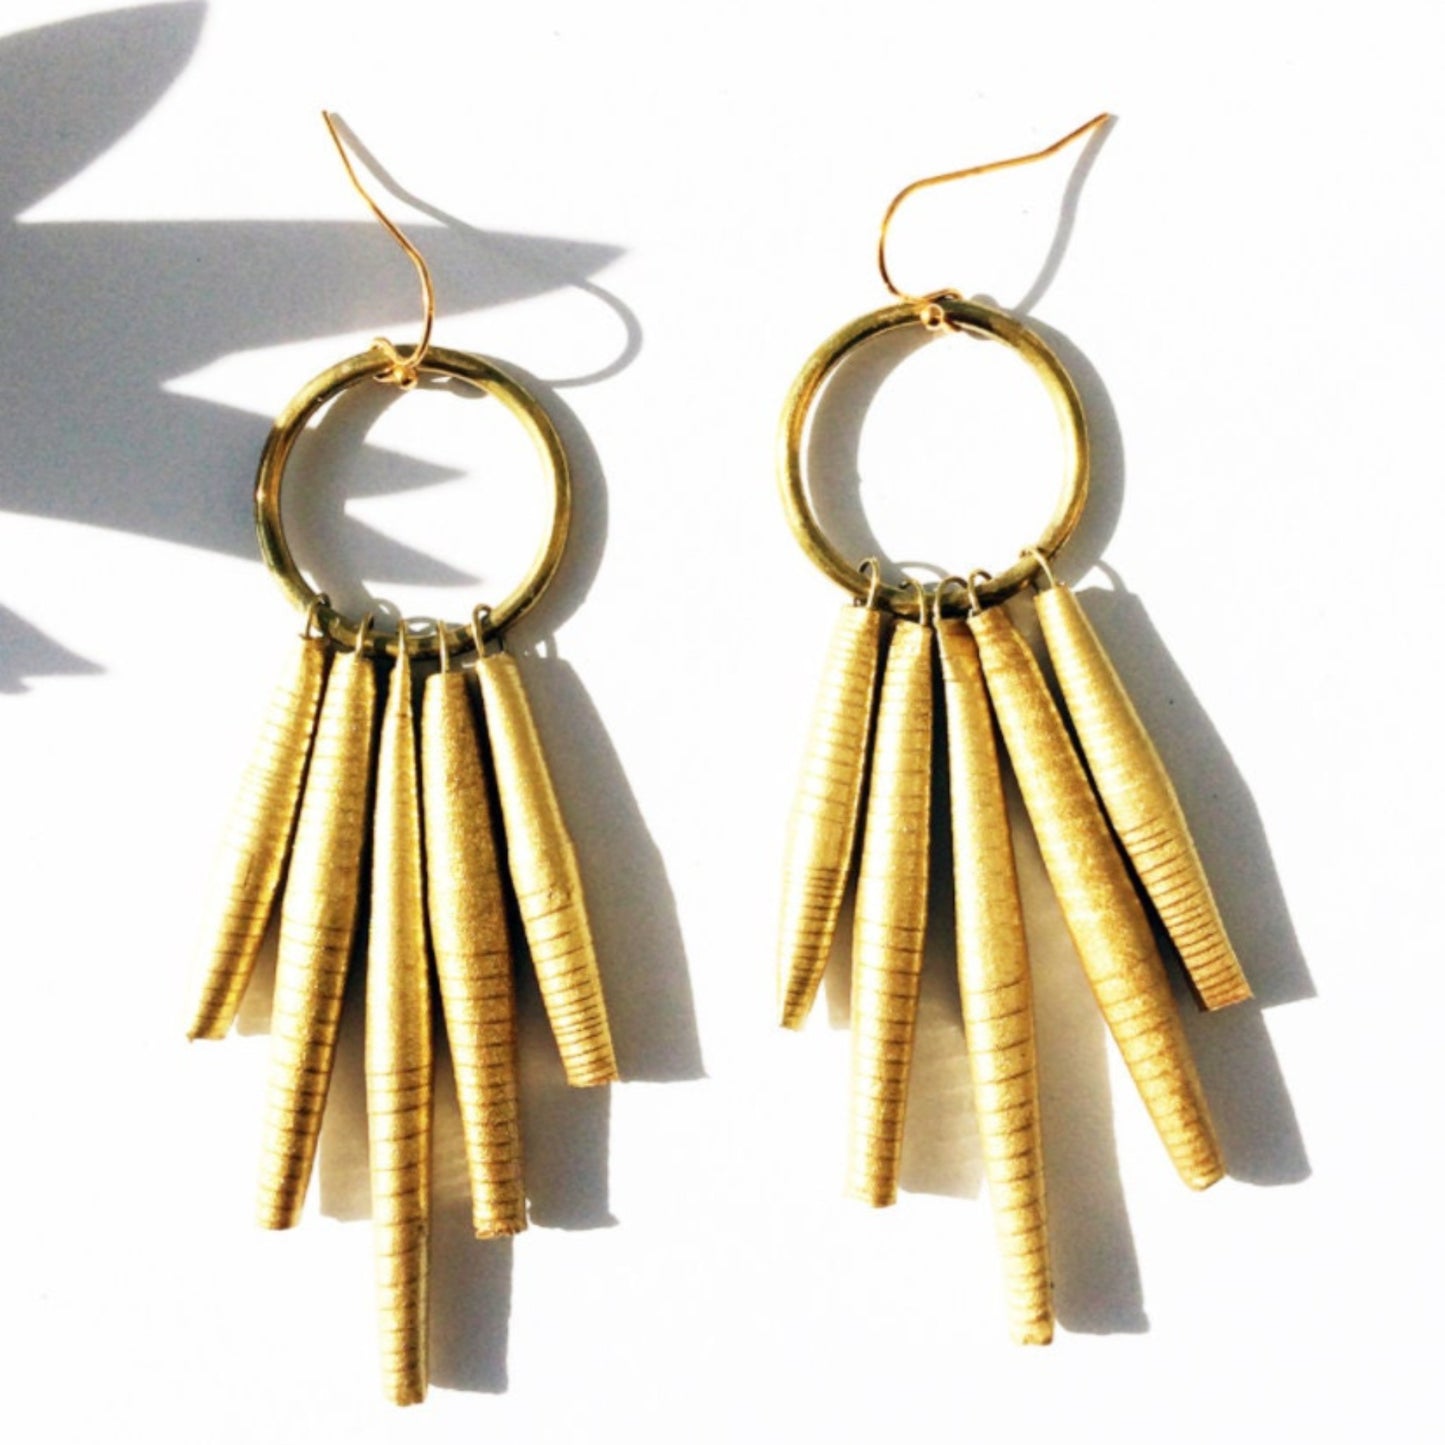 Handmade Recycled Paper Golden Circle Earrings